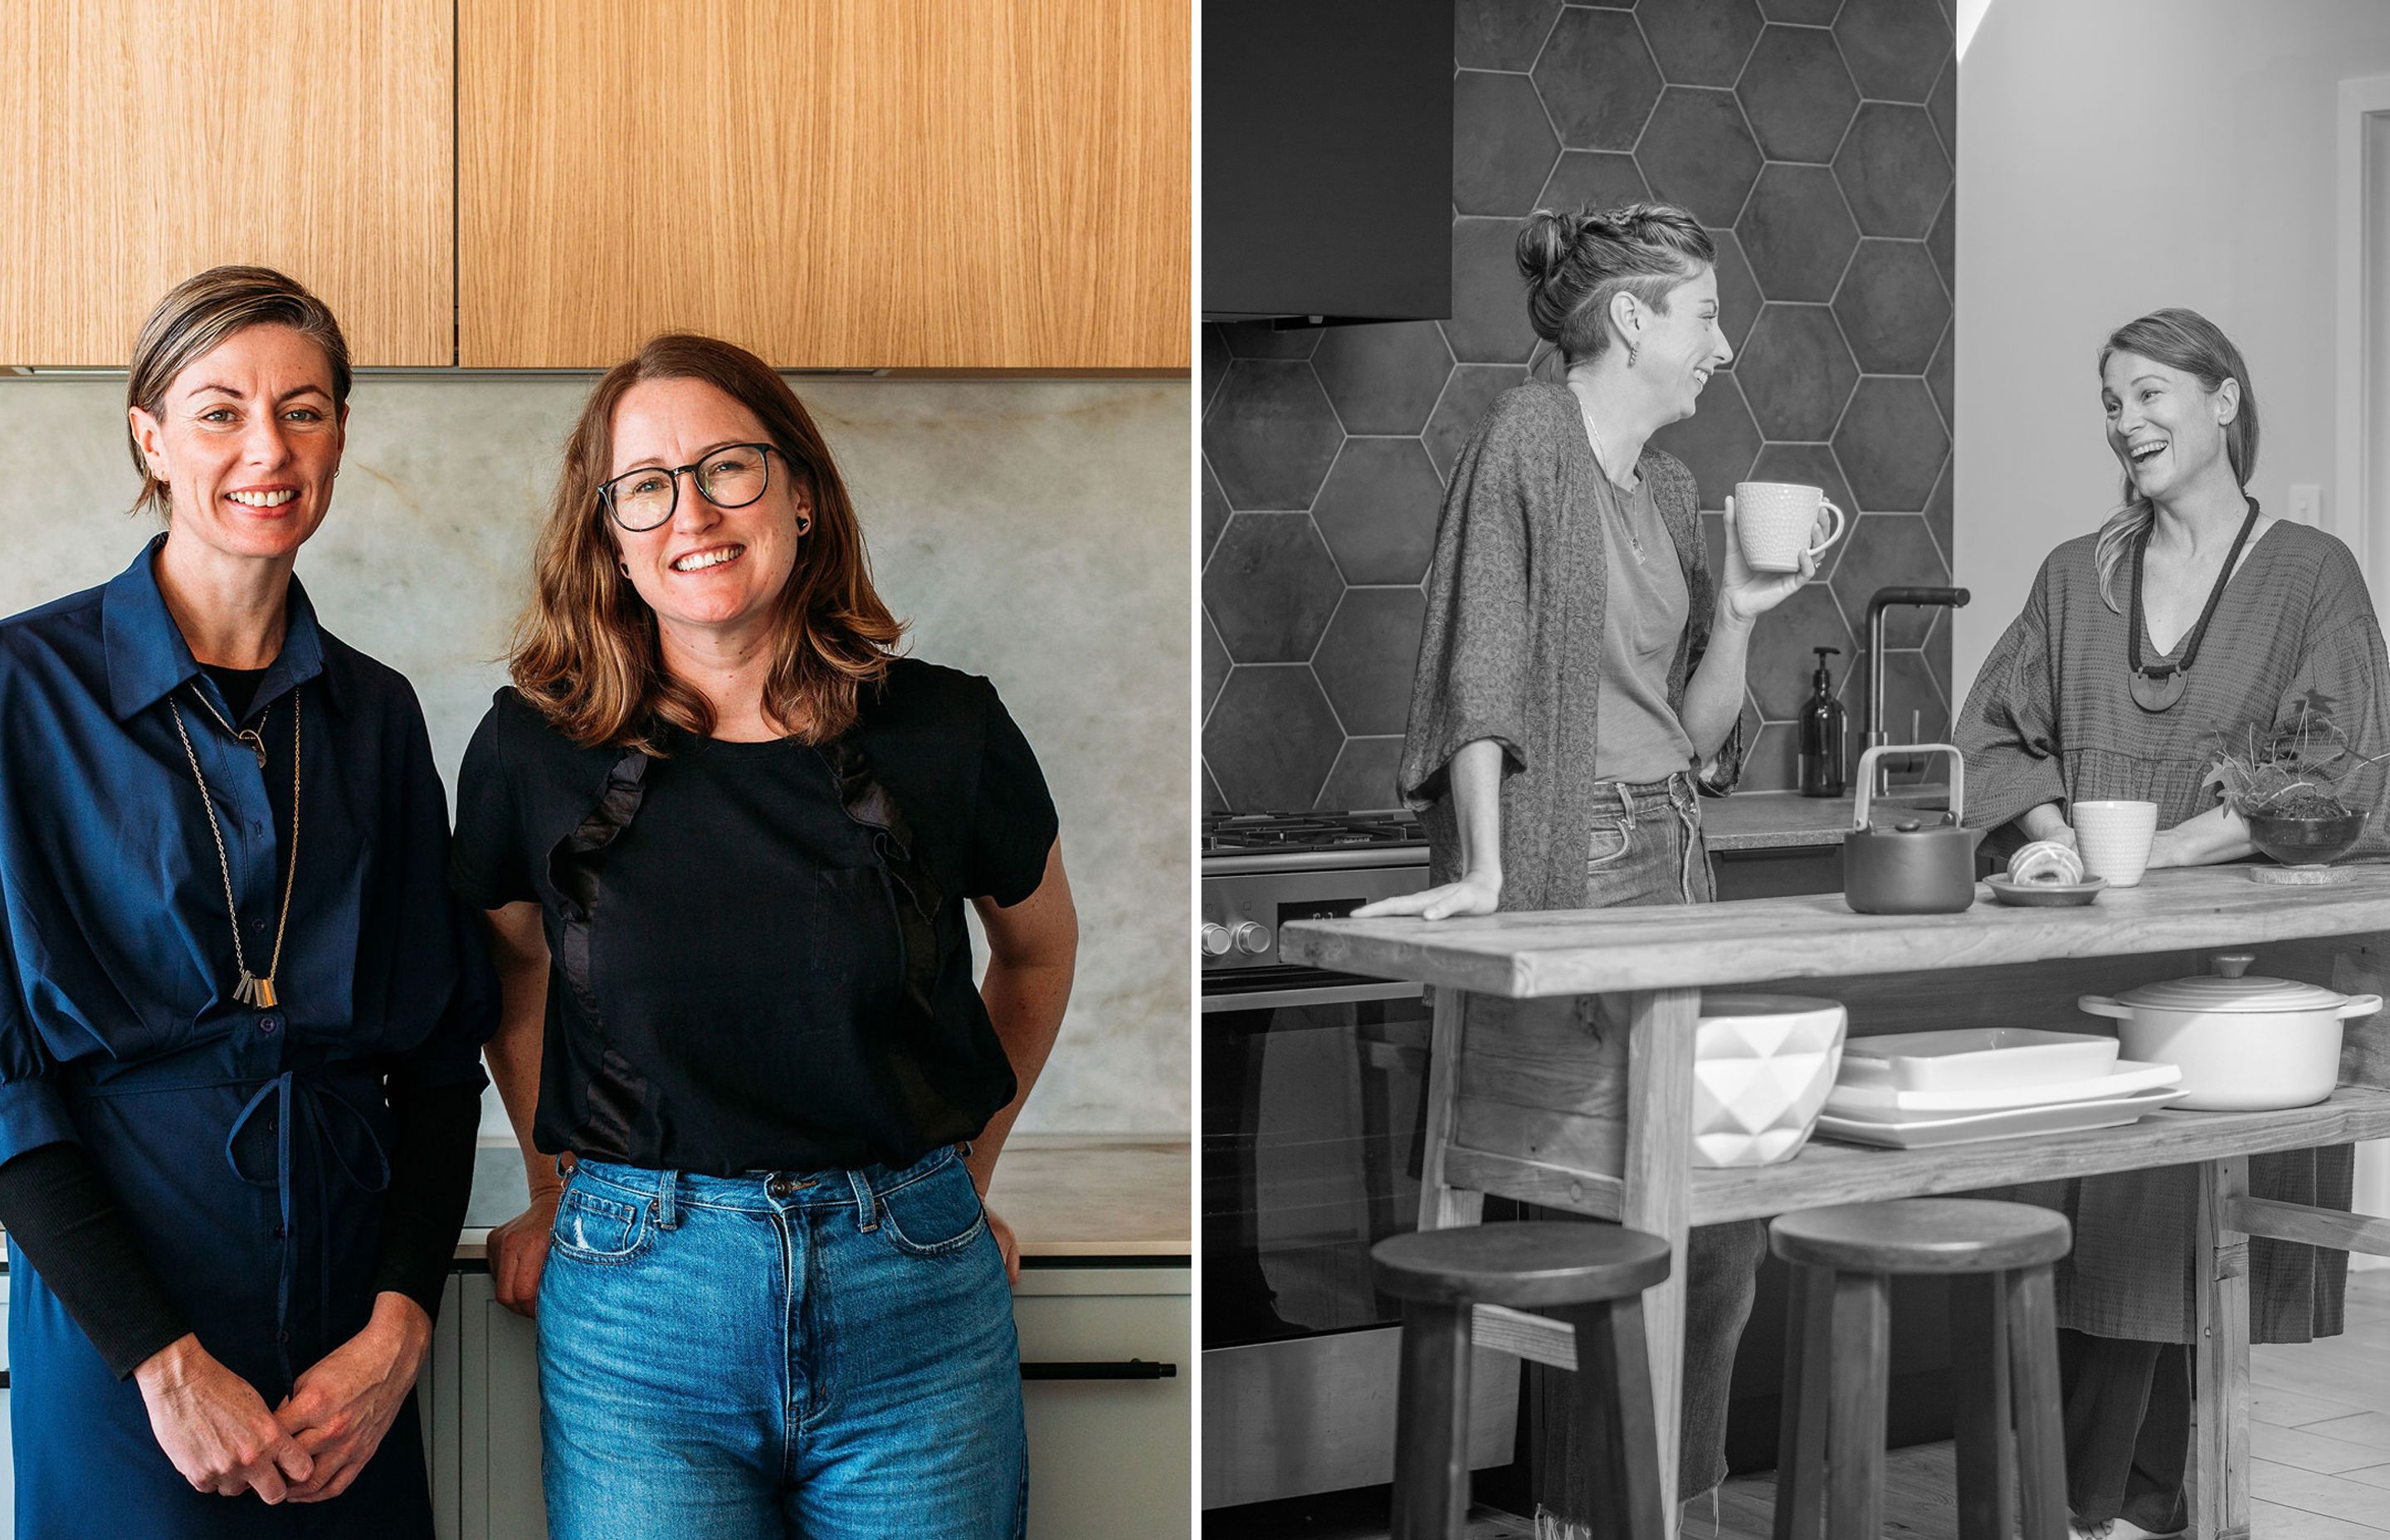 Brewing coffee, pouring wines, getting work done, a place we connect. Photo credits: Anna Briggs Photography + Jeff McEwan - Capture Studios.